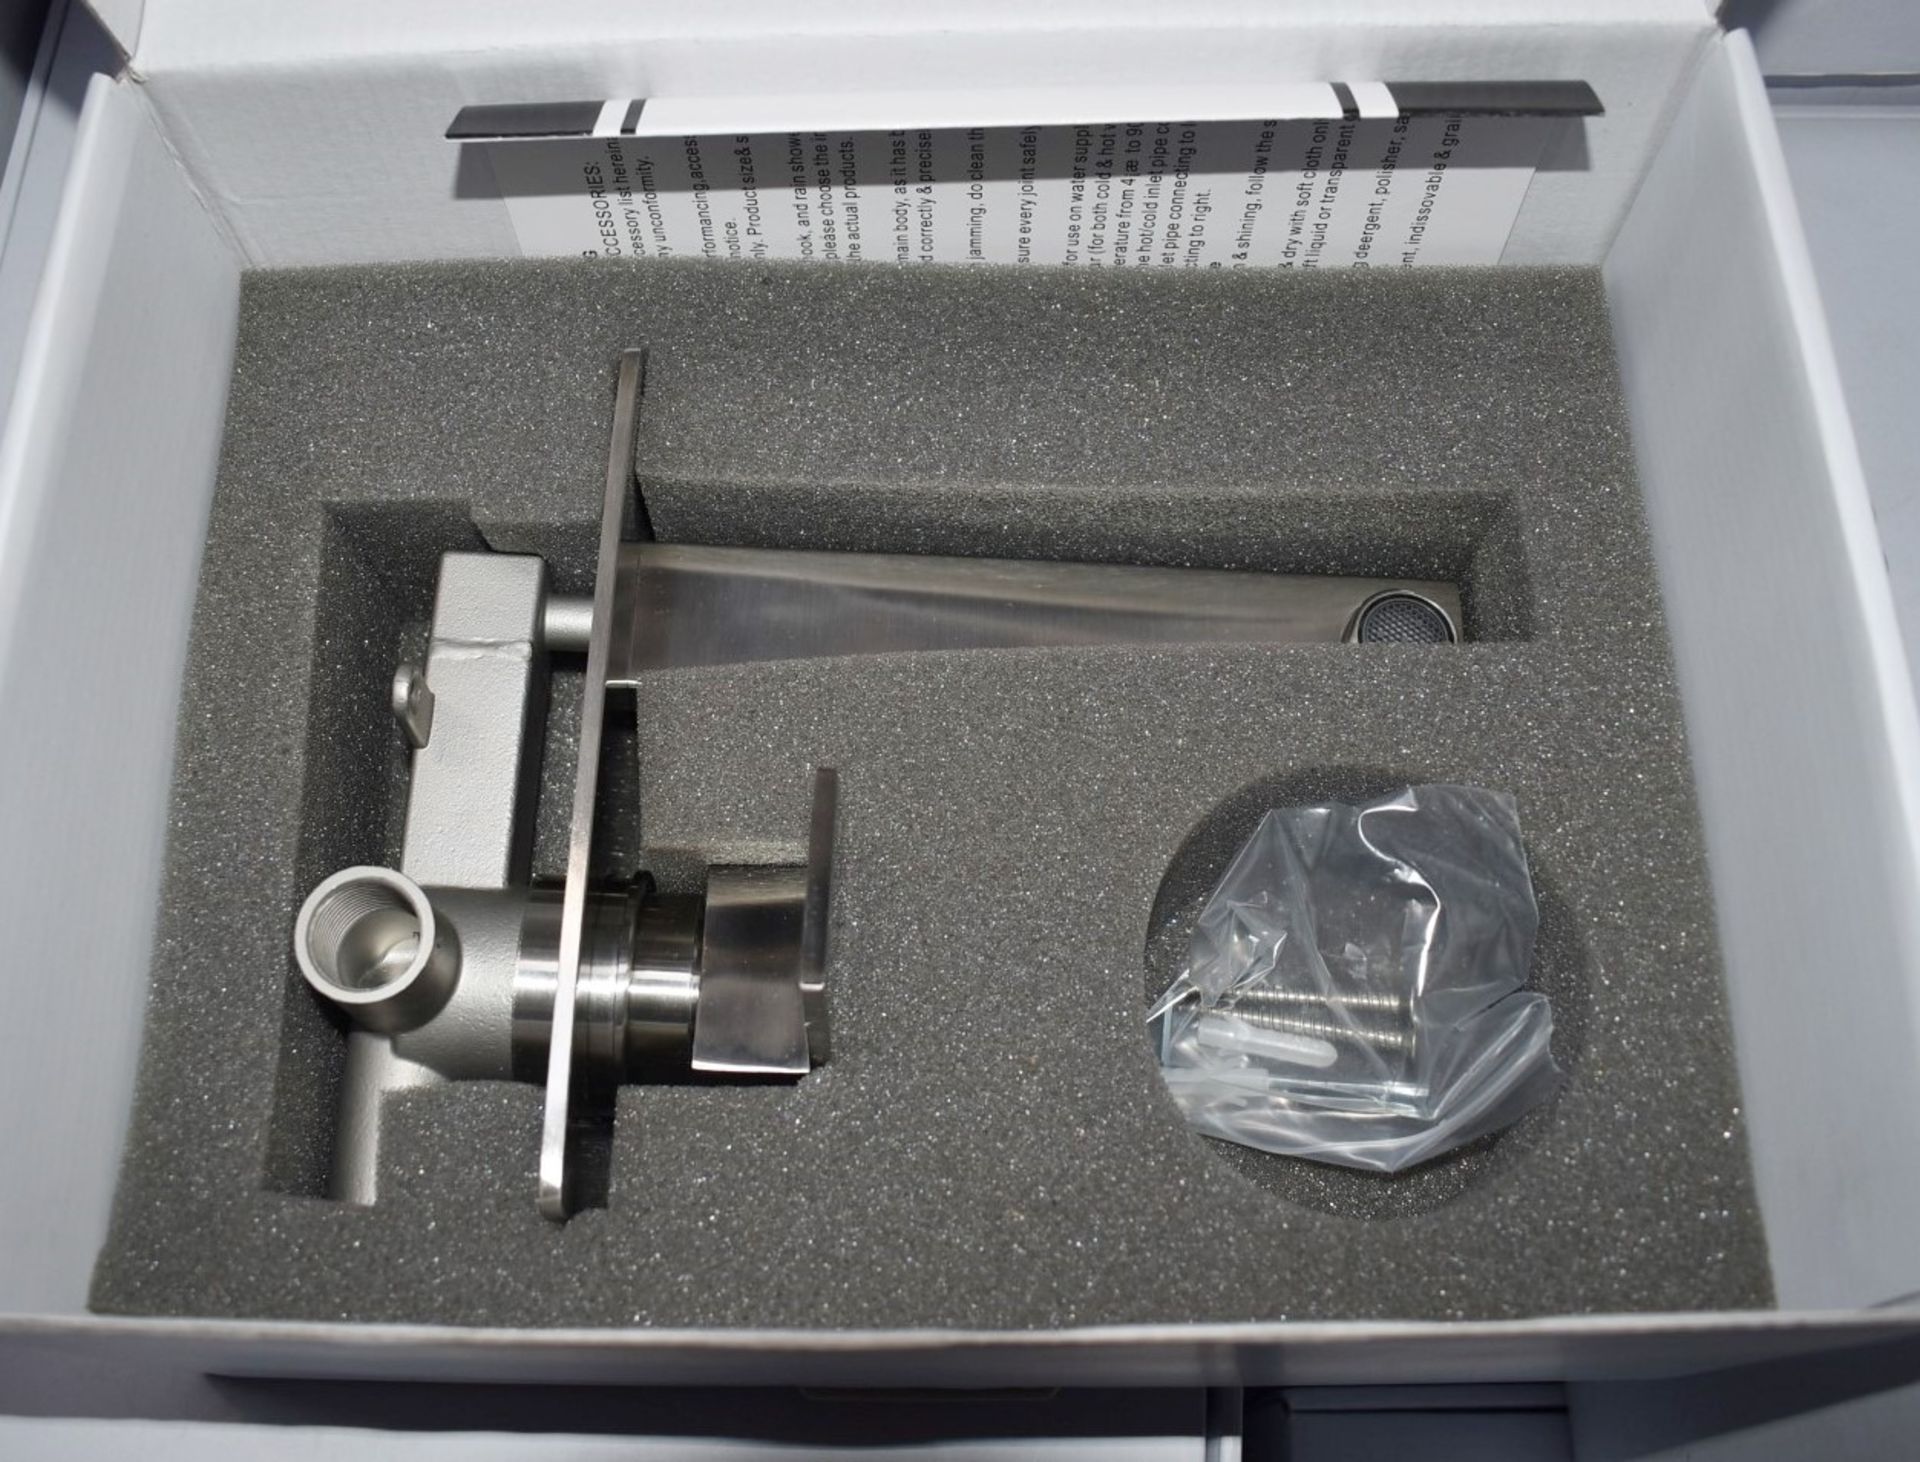 1 x Stonearth 'Metro' Stainless Steel Wall Mounted Tap - Brand New & Boxed - RRP £345 - Ref: TP823 - Image 6 of 8